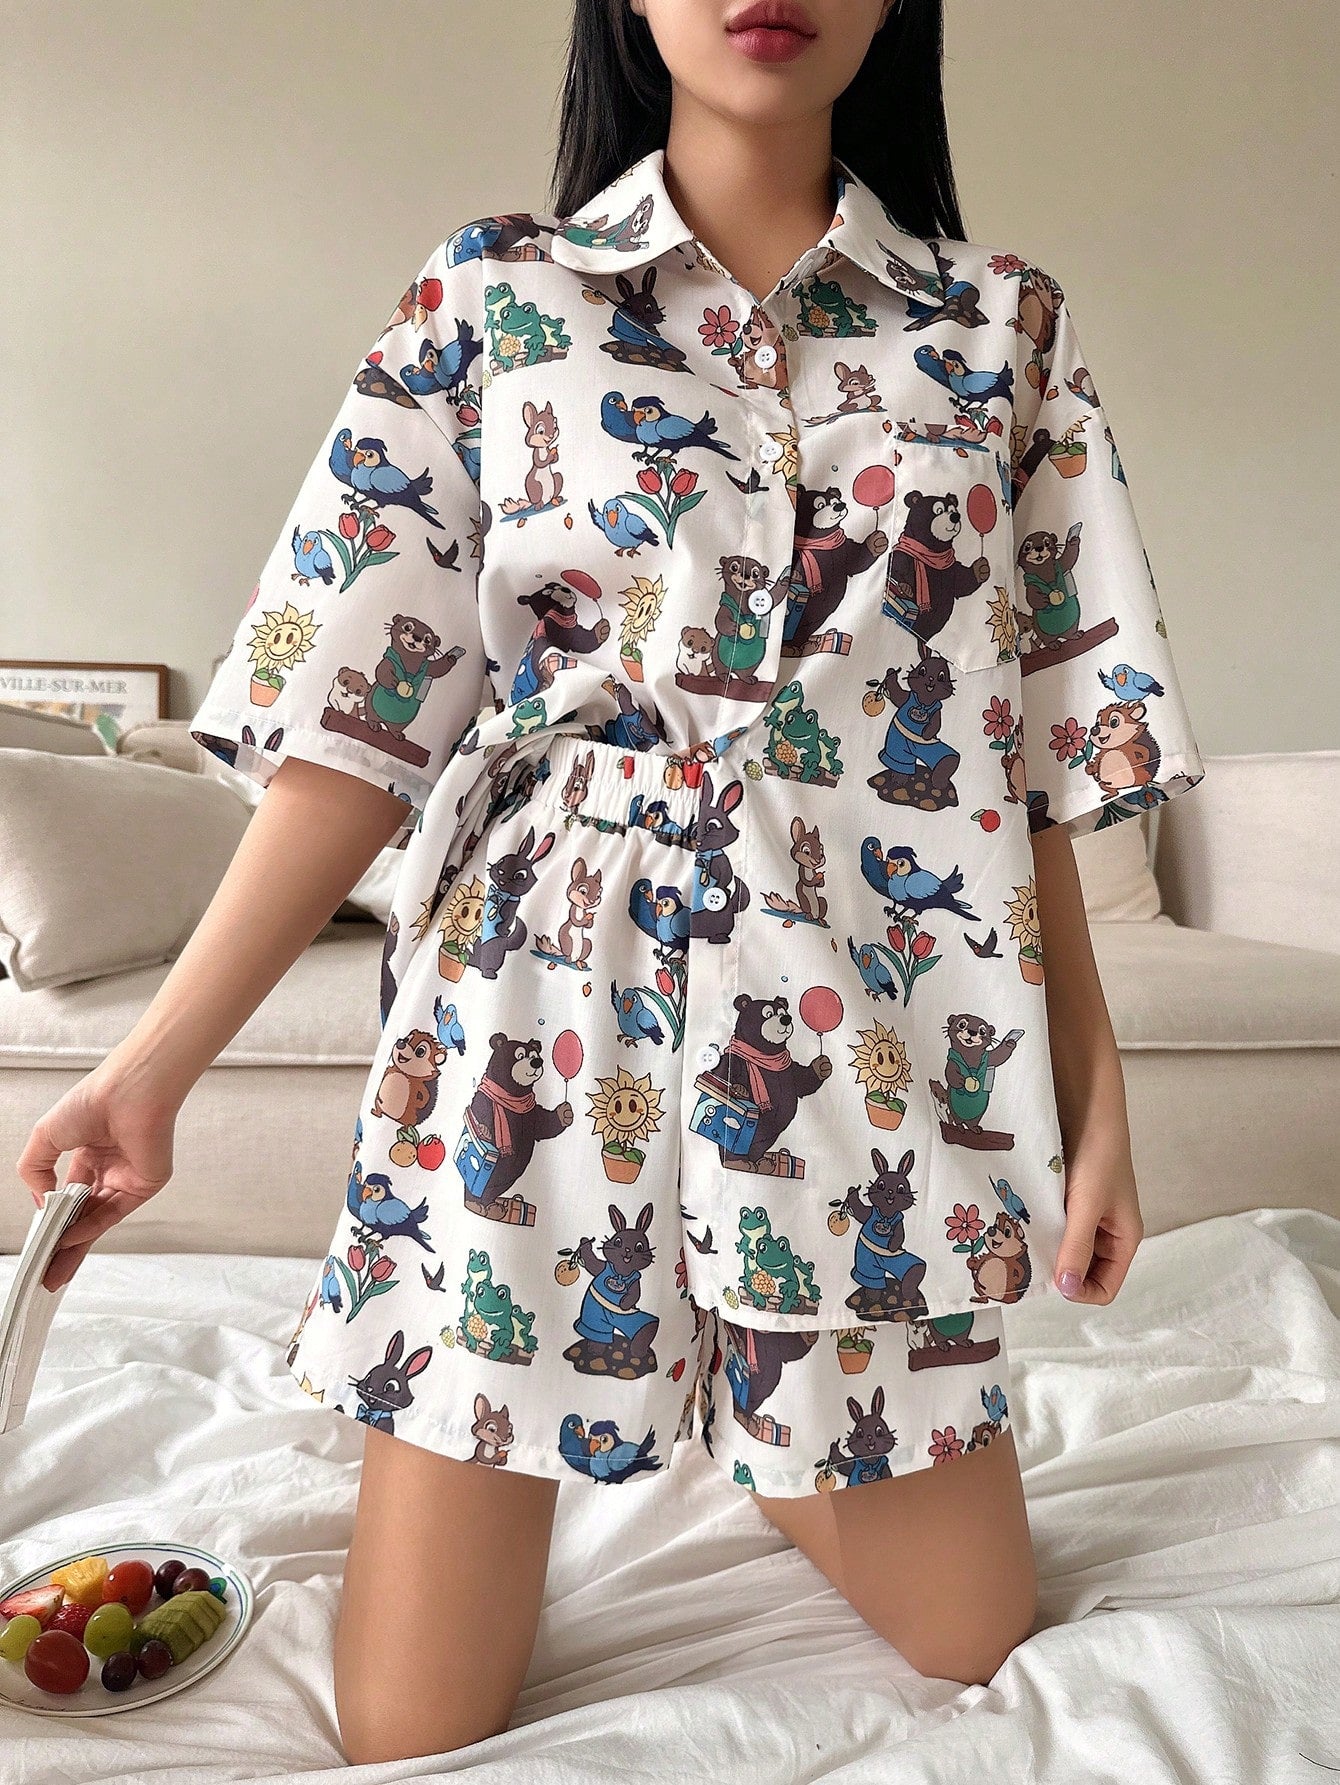 Women's Cute And Delicate Cartoon Pattern Short Sleeve And Short Pants Pajama Set